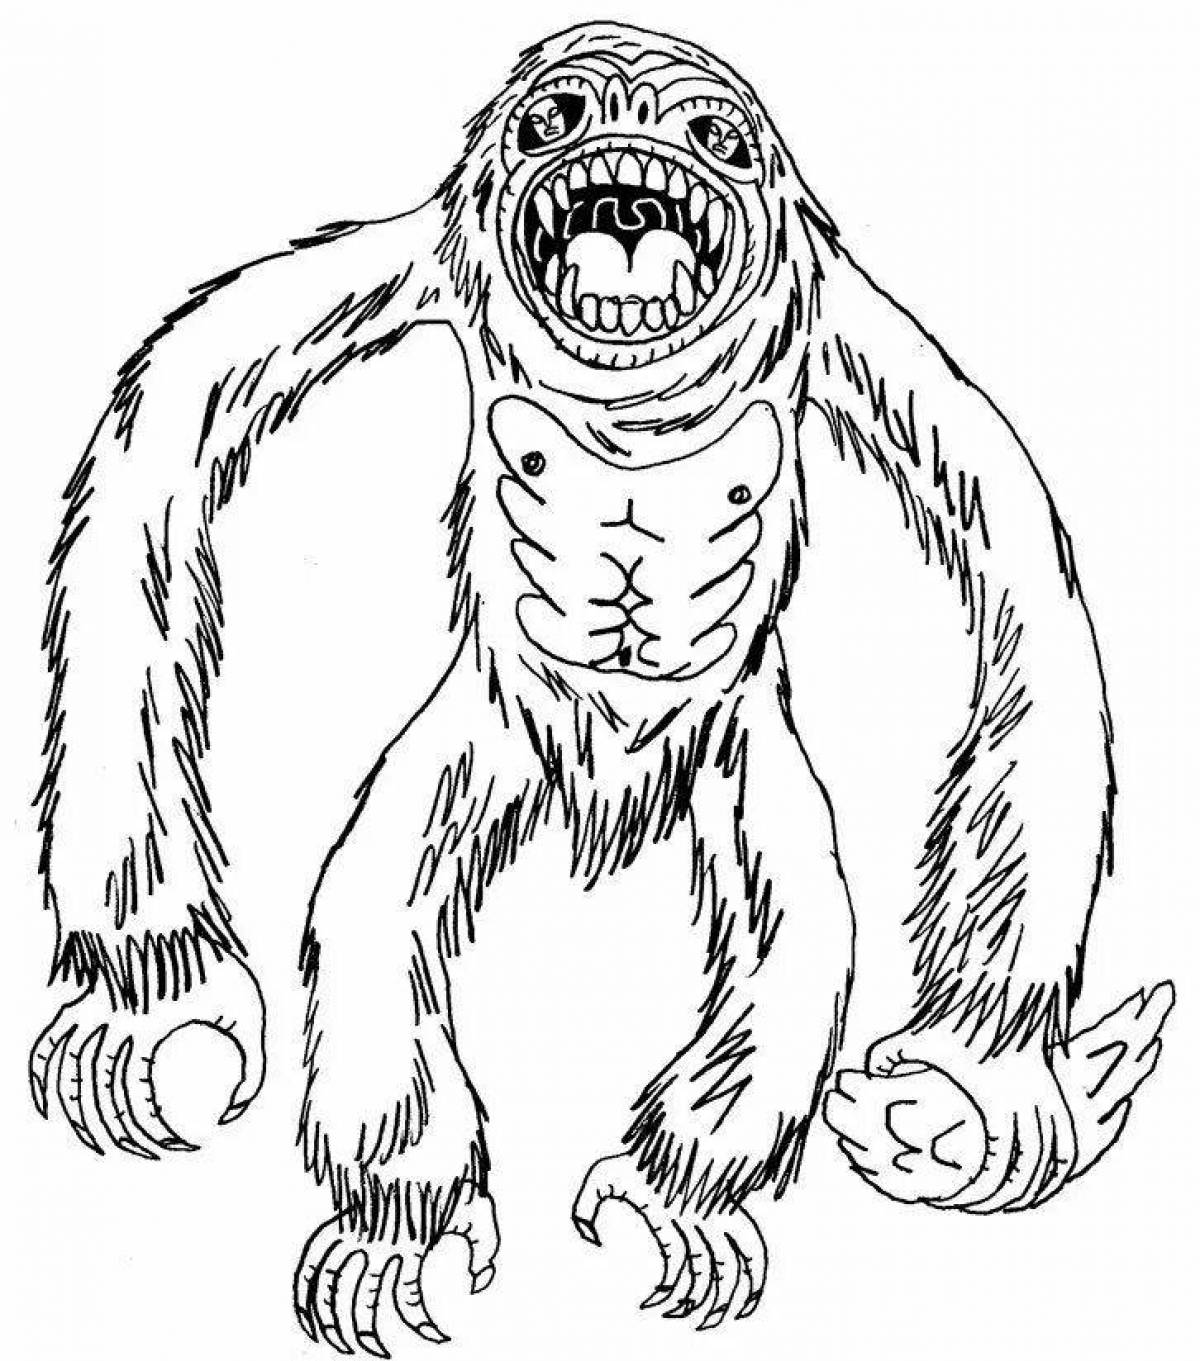 Big foot style coloring book